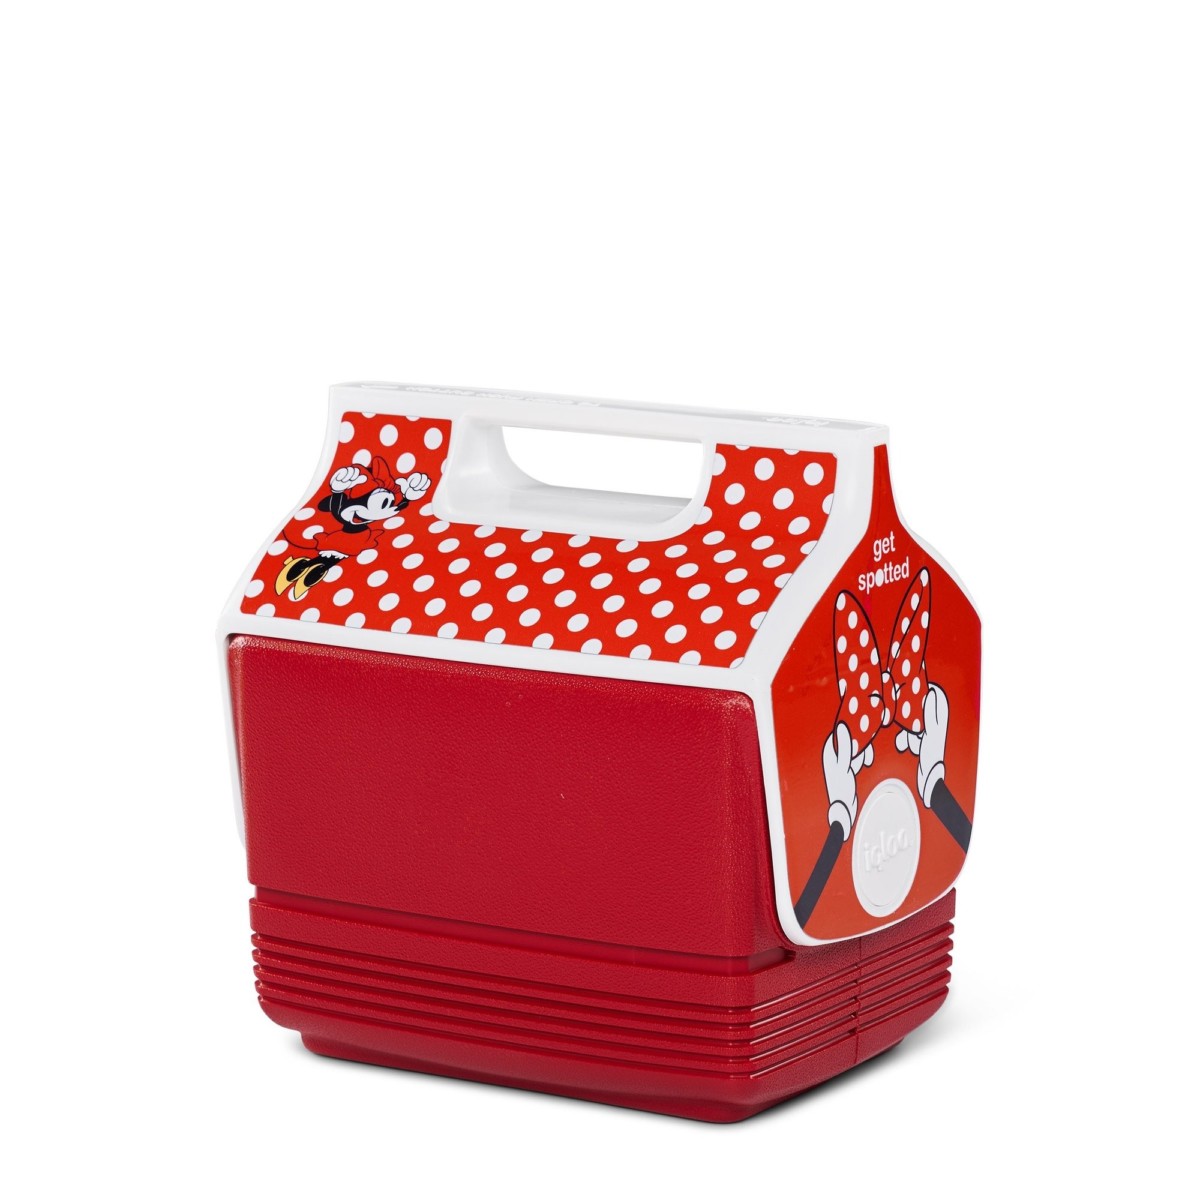 Disney and Igloo have teamed up to release all-new Playmate coolers